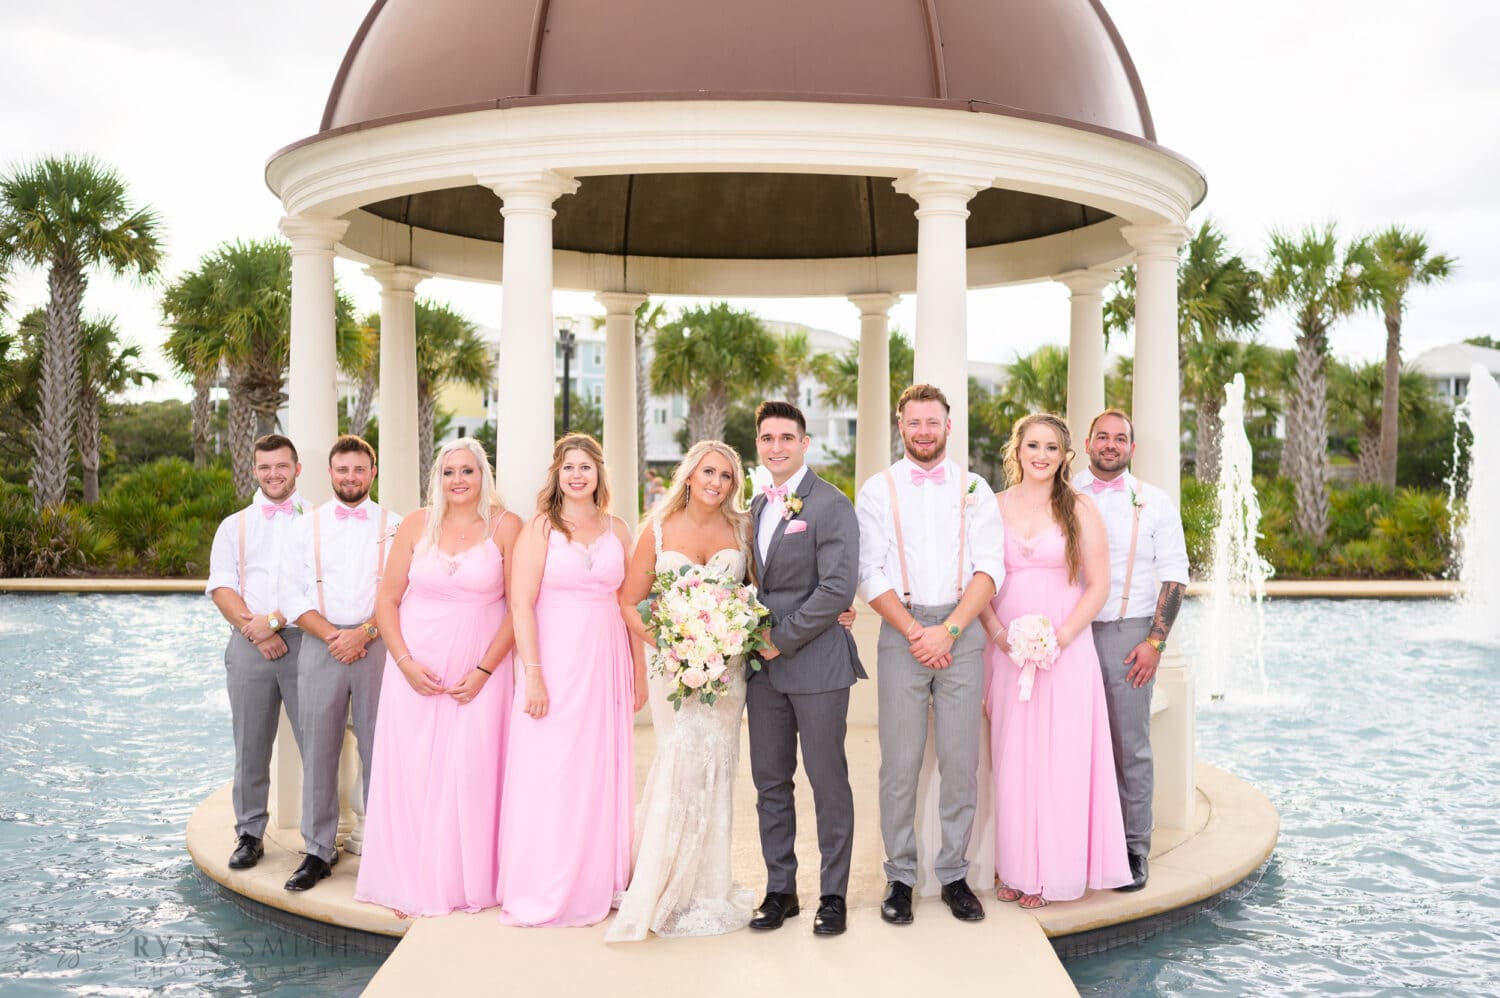 Bridal party standing in front of the gazebo - 21 Main Events at North Beach